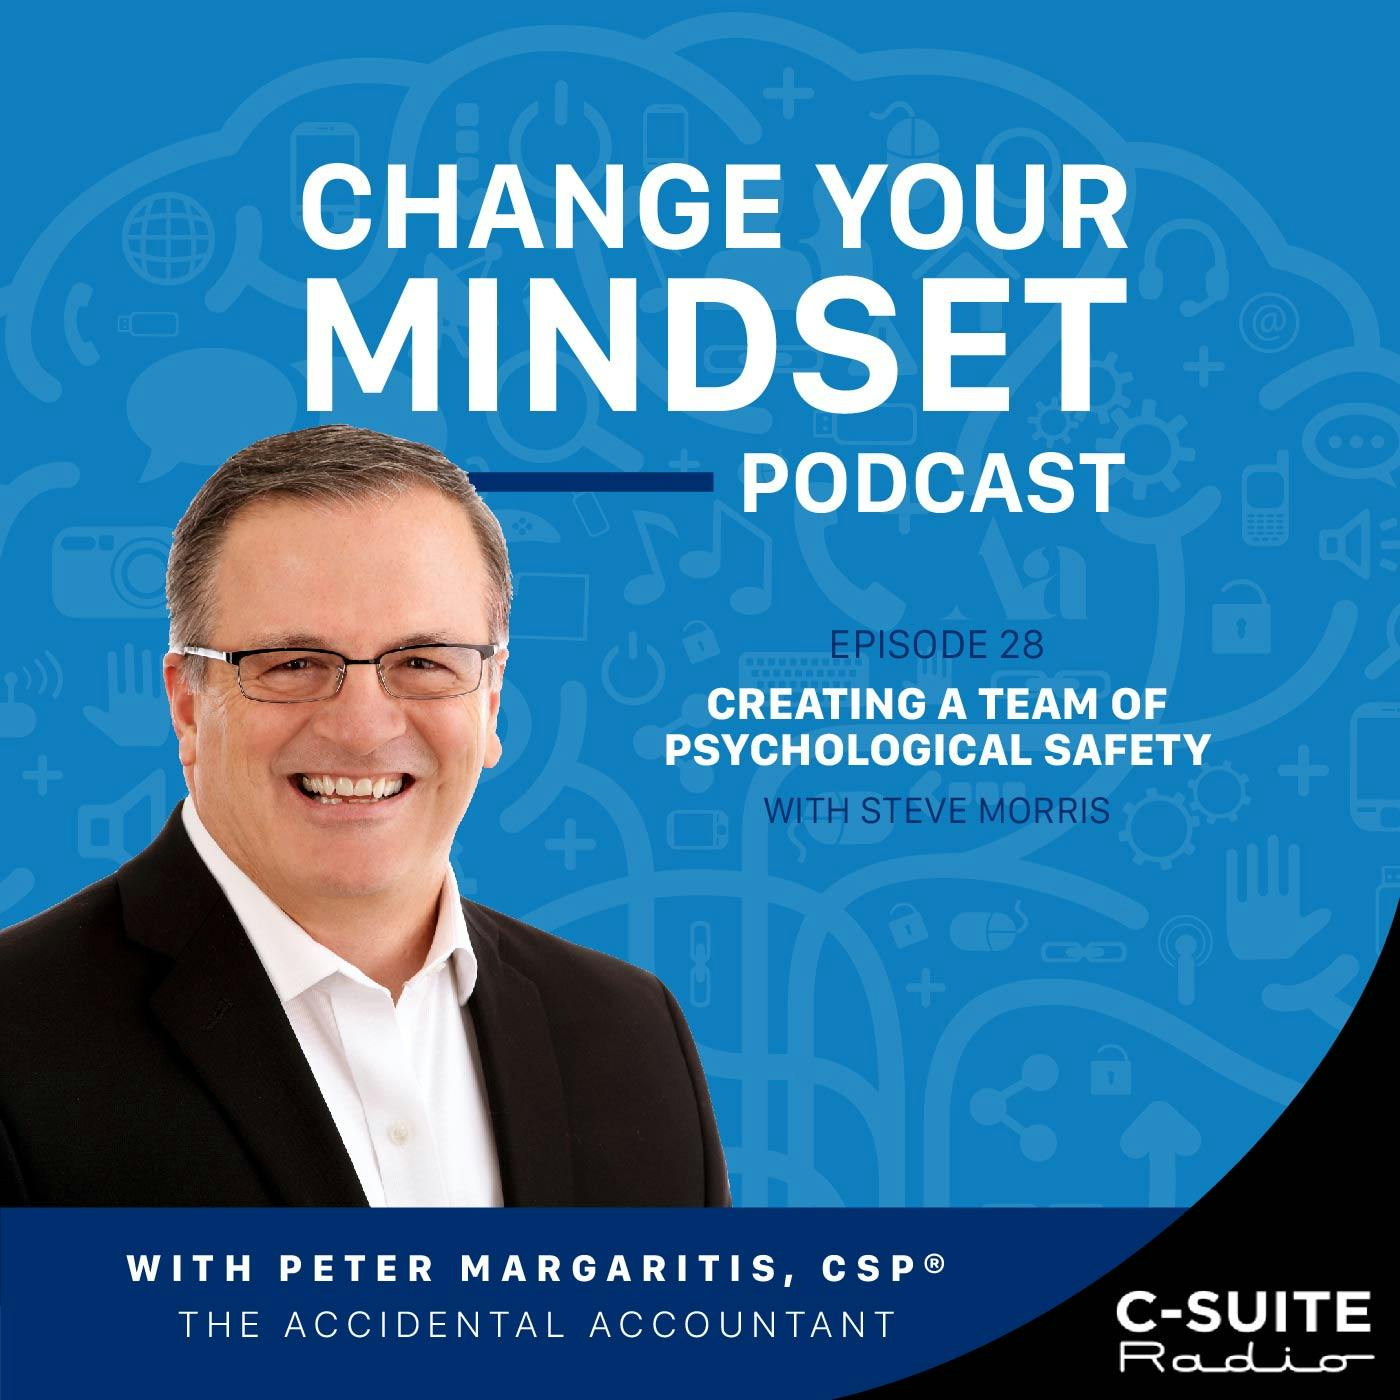 S4E28. Creating a Team of Psychological Safety with Steve Morris